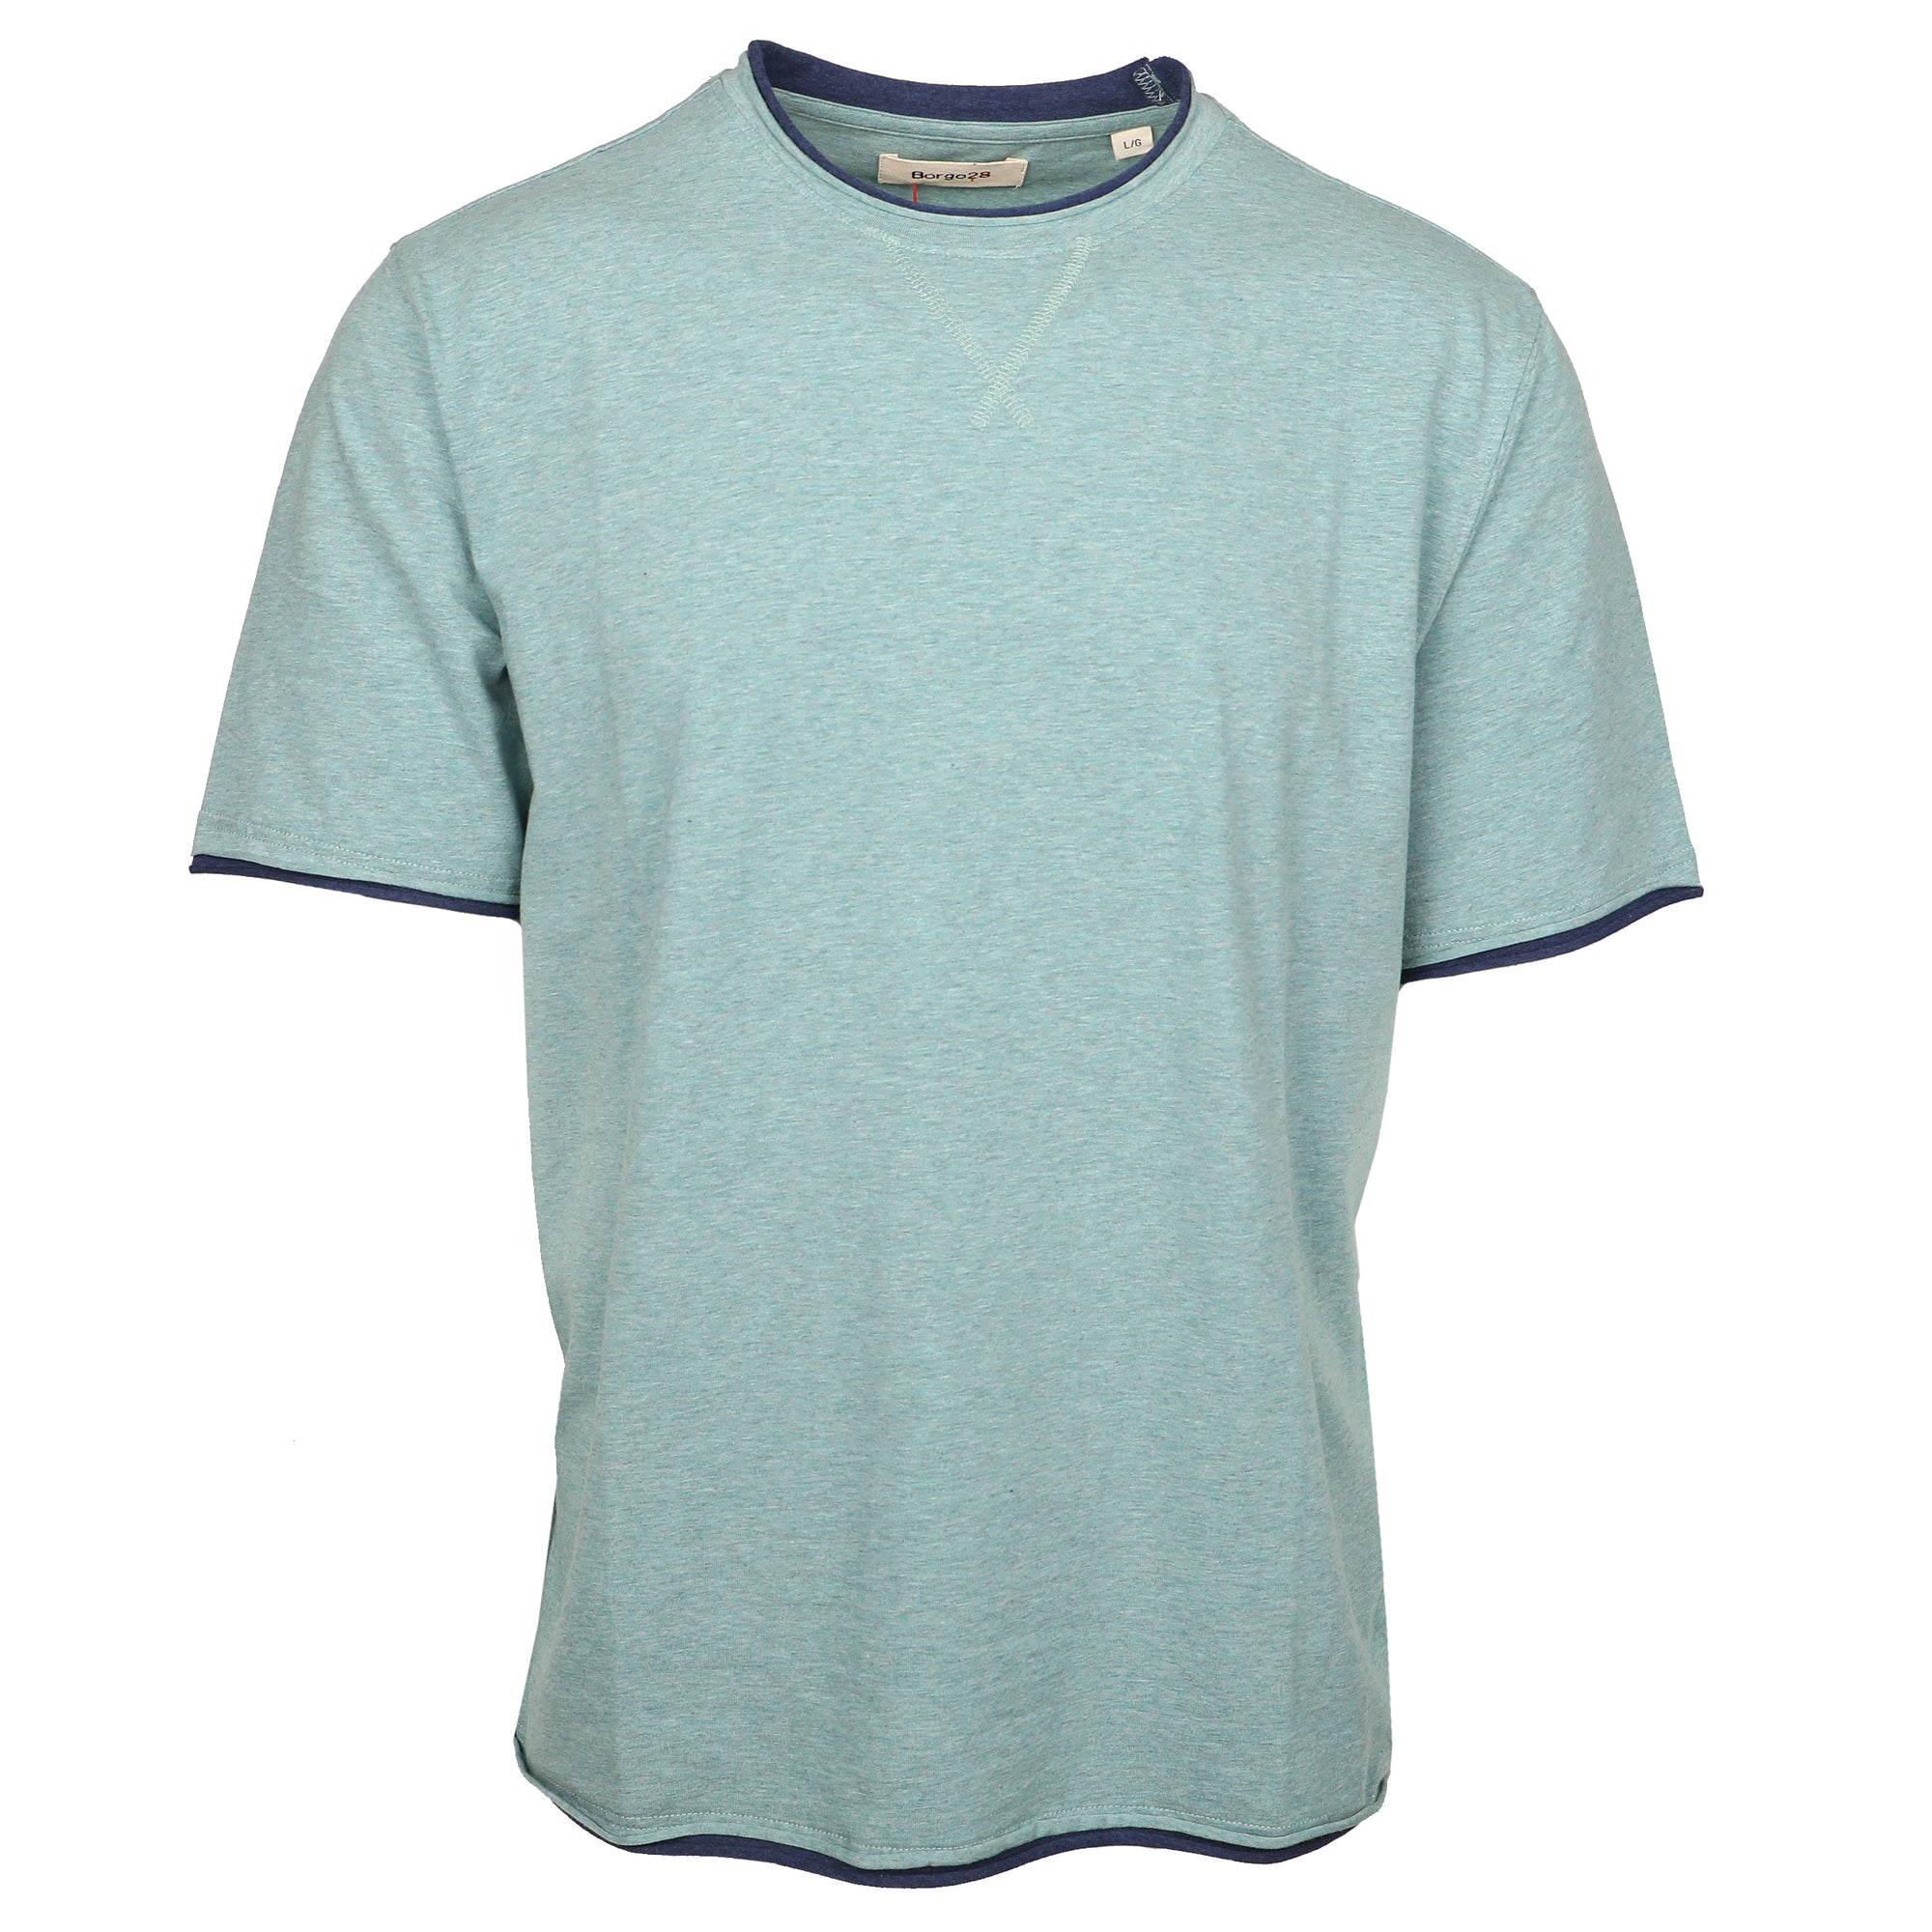 Step out into the warm weather in confidence with the Pompeii Melange Contrast Crew T-Shirt. Crafted from 100% cotton, this agave green t-shirt stands out with a bold navy contrast. Take on the summer with a daring fashion statement and make a statement wherever you go.   100% Luxe Cotton • Relaxed Fit • Contrast Edging • Machine Washable • Imported